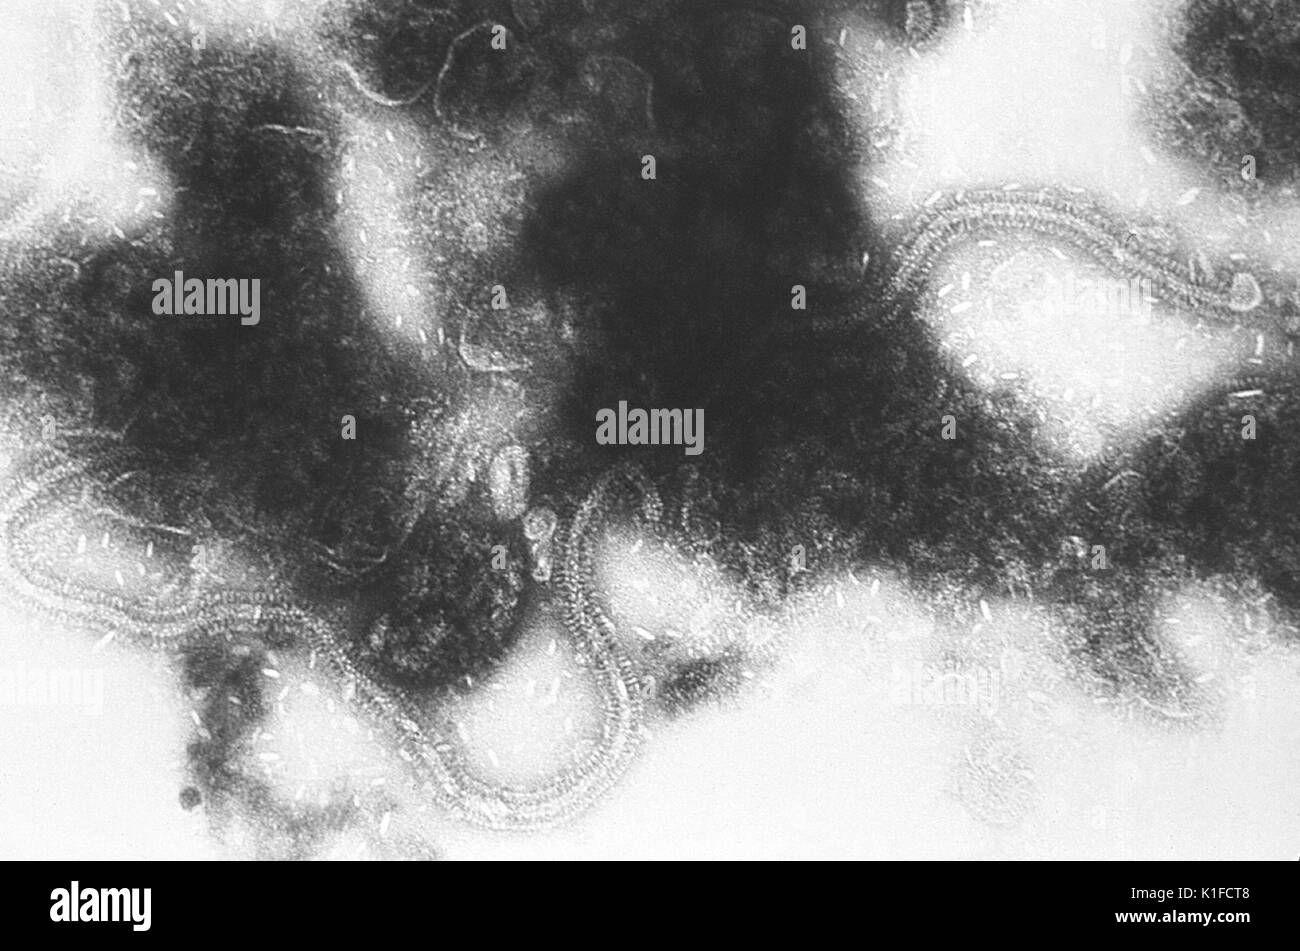 This electron micrograph depicts the Respiratory Syncytial Virus (RSV) pathogen. RSV is a negative-sense, enveloped RNA virus. The virion is variable in shape and size, with a diameter ranging between 120 and 300 nm, and is unstable in the environment surviving only a few hours on environmental surfaces. Image courtesy CDC/Dr. Erskine Palmer, 1981. Stock Photo